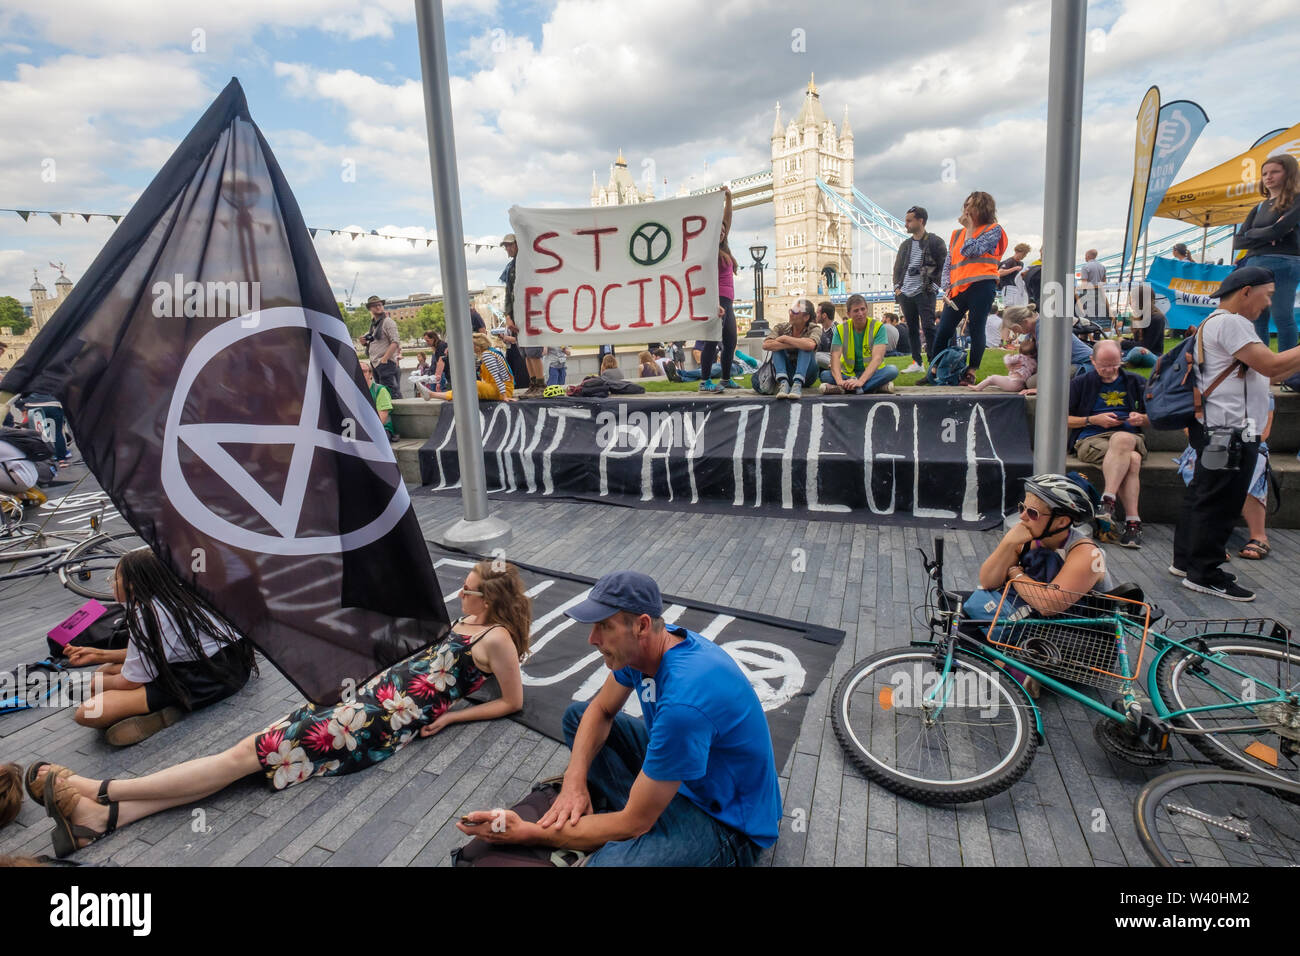 London, UK. 18th July 2019. Extinction Rebellion supporters at the City Hall rally and die-in to declare a tax strike against the Greater London Authority, withholding the GLA element of their council tax until they abandon projects which will cause environmental degradation and hasten ecological collapse. They demand the GLA stop all infrastructure projects polluting London’s air and invest in measures to cut carbon emissions and encourage healthier lifestyles and empower a citizen’s assembly to re-write the London Plan. Peter Marshall/Alamy Live News Stock Photo